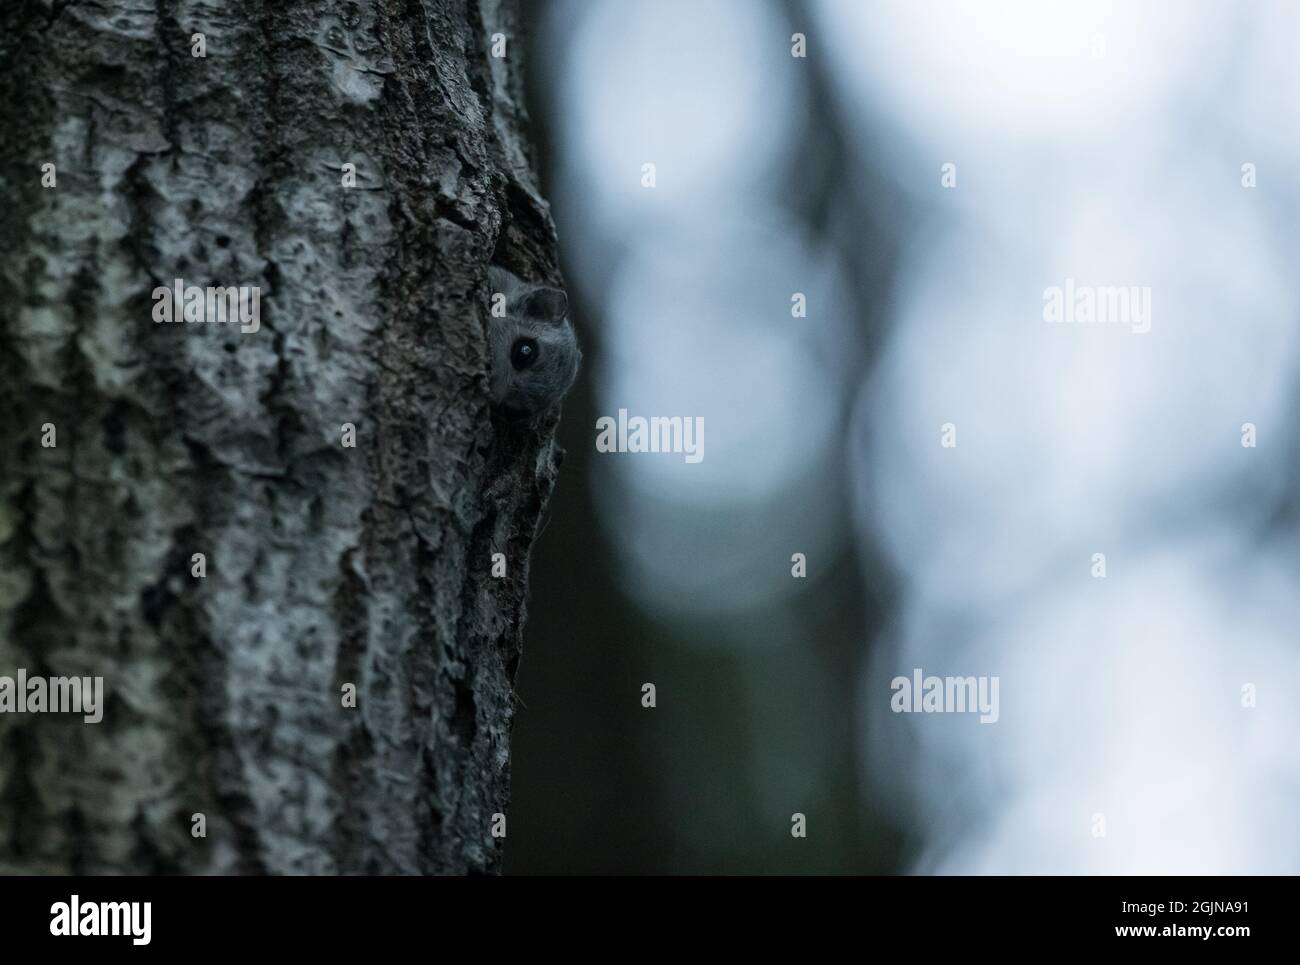 Siberian flying squirrel (Pteromys volans) in it's nesting tree, wild Finland Stock Photo